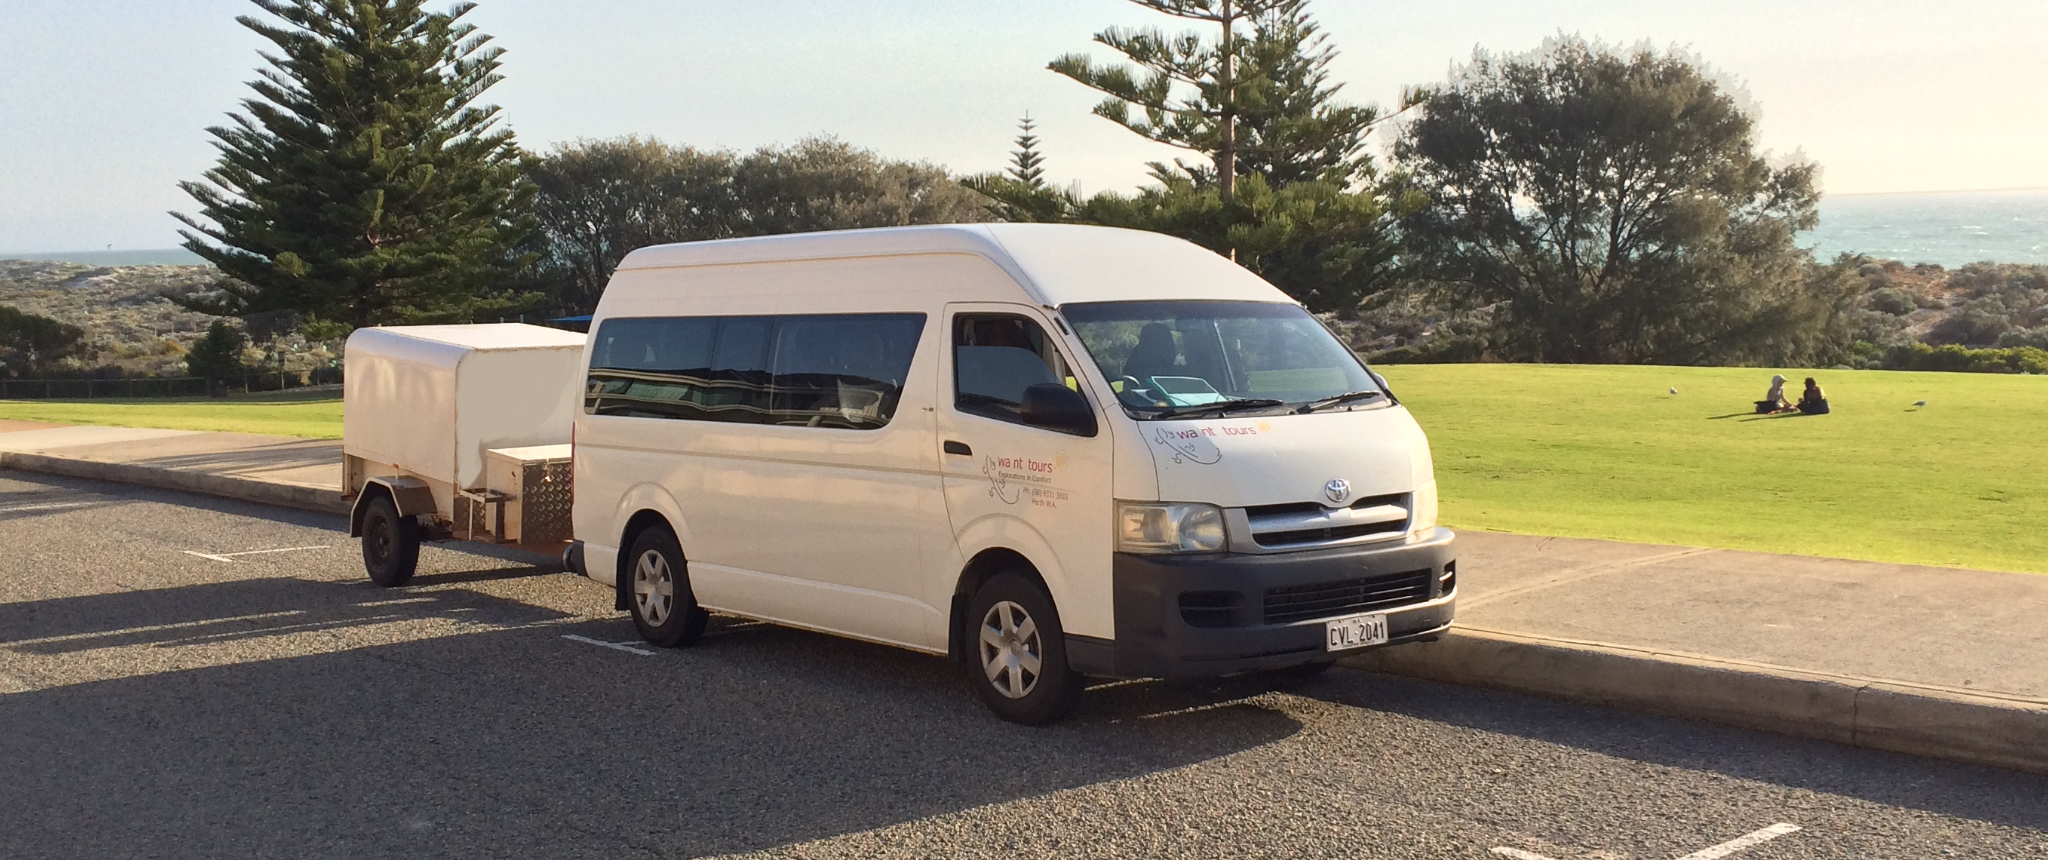 Transfer from City of Cottesloe to PER Airport (Private Charter)